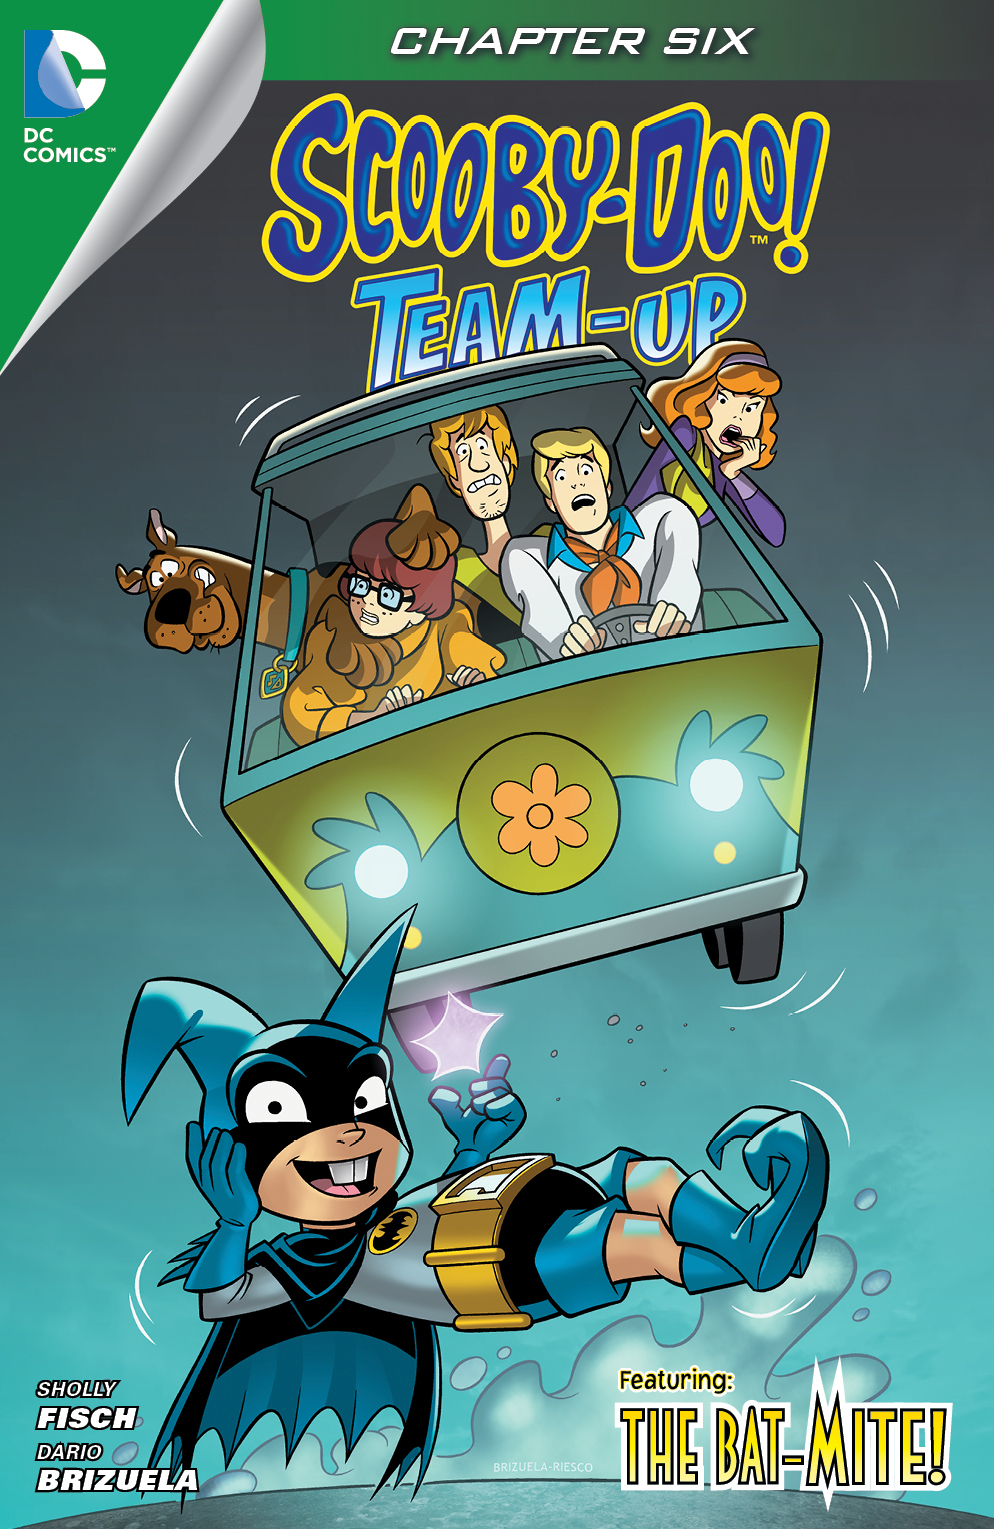 Scooby-Doo Team-Up #6 preview images